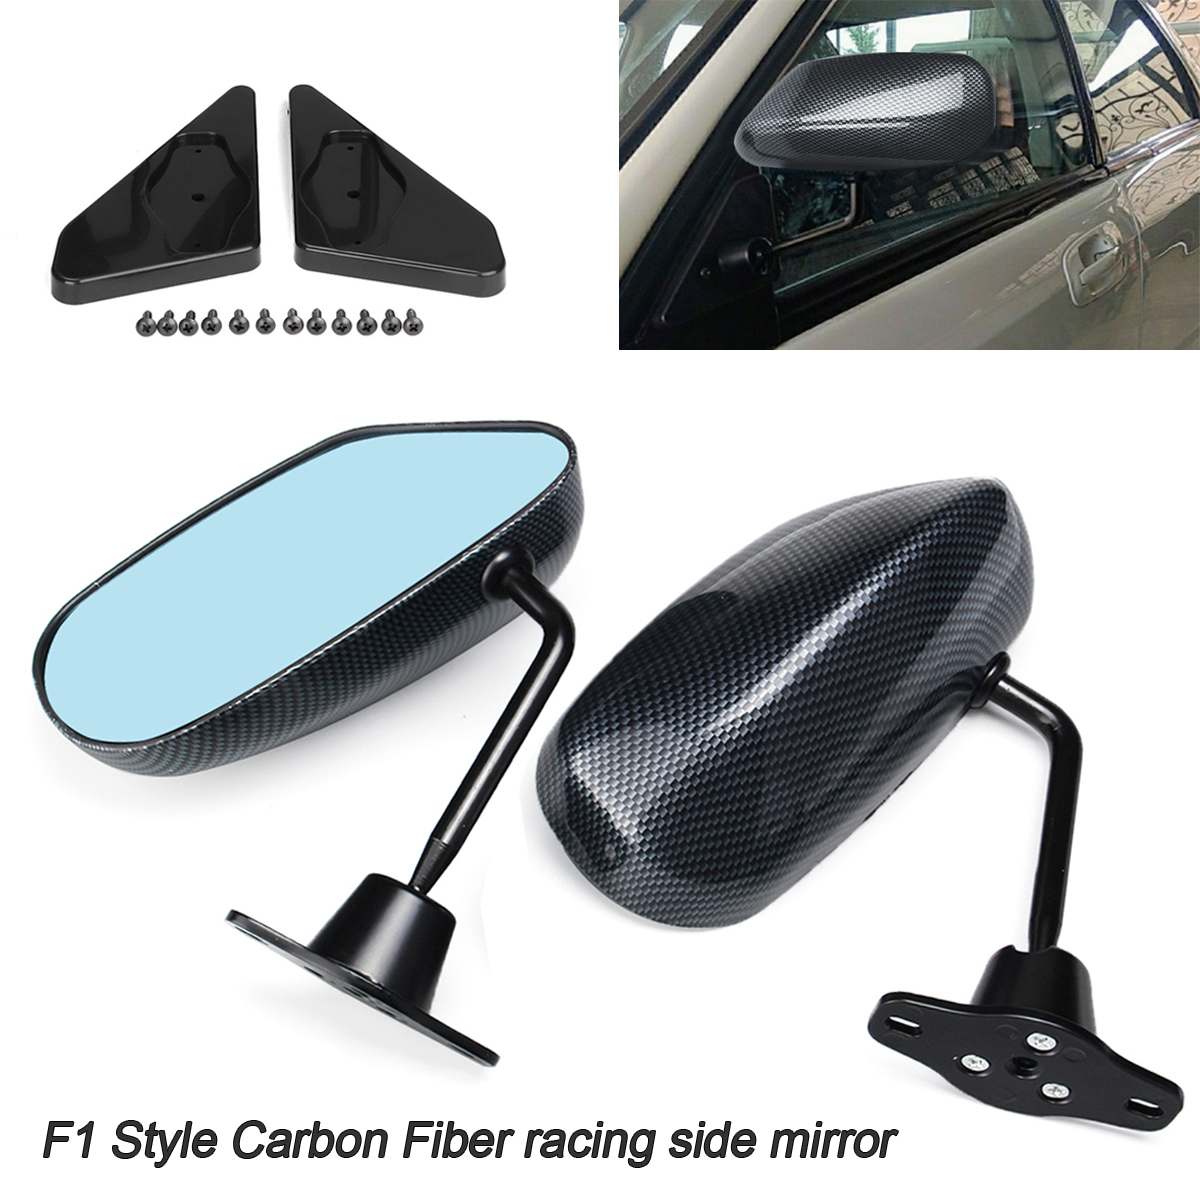 1Pair Universal Car Carbon Fiber Autos Blue Rear View Mirror F1 Carbon Look racing Side Mirror Glass & Wide Angle Metal Bracket